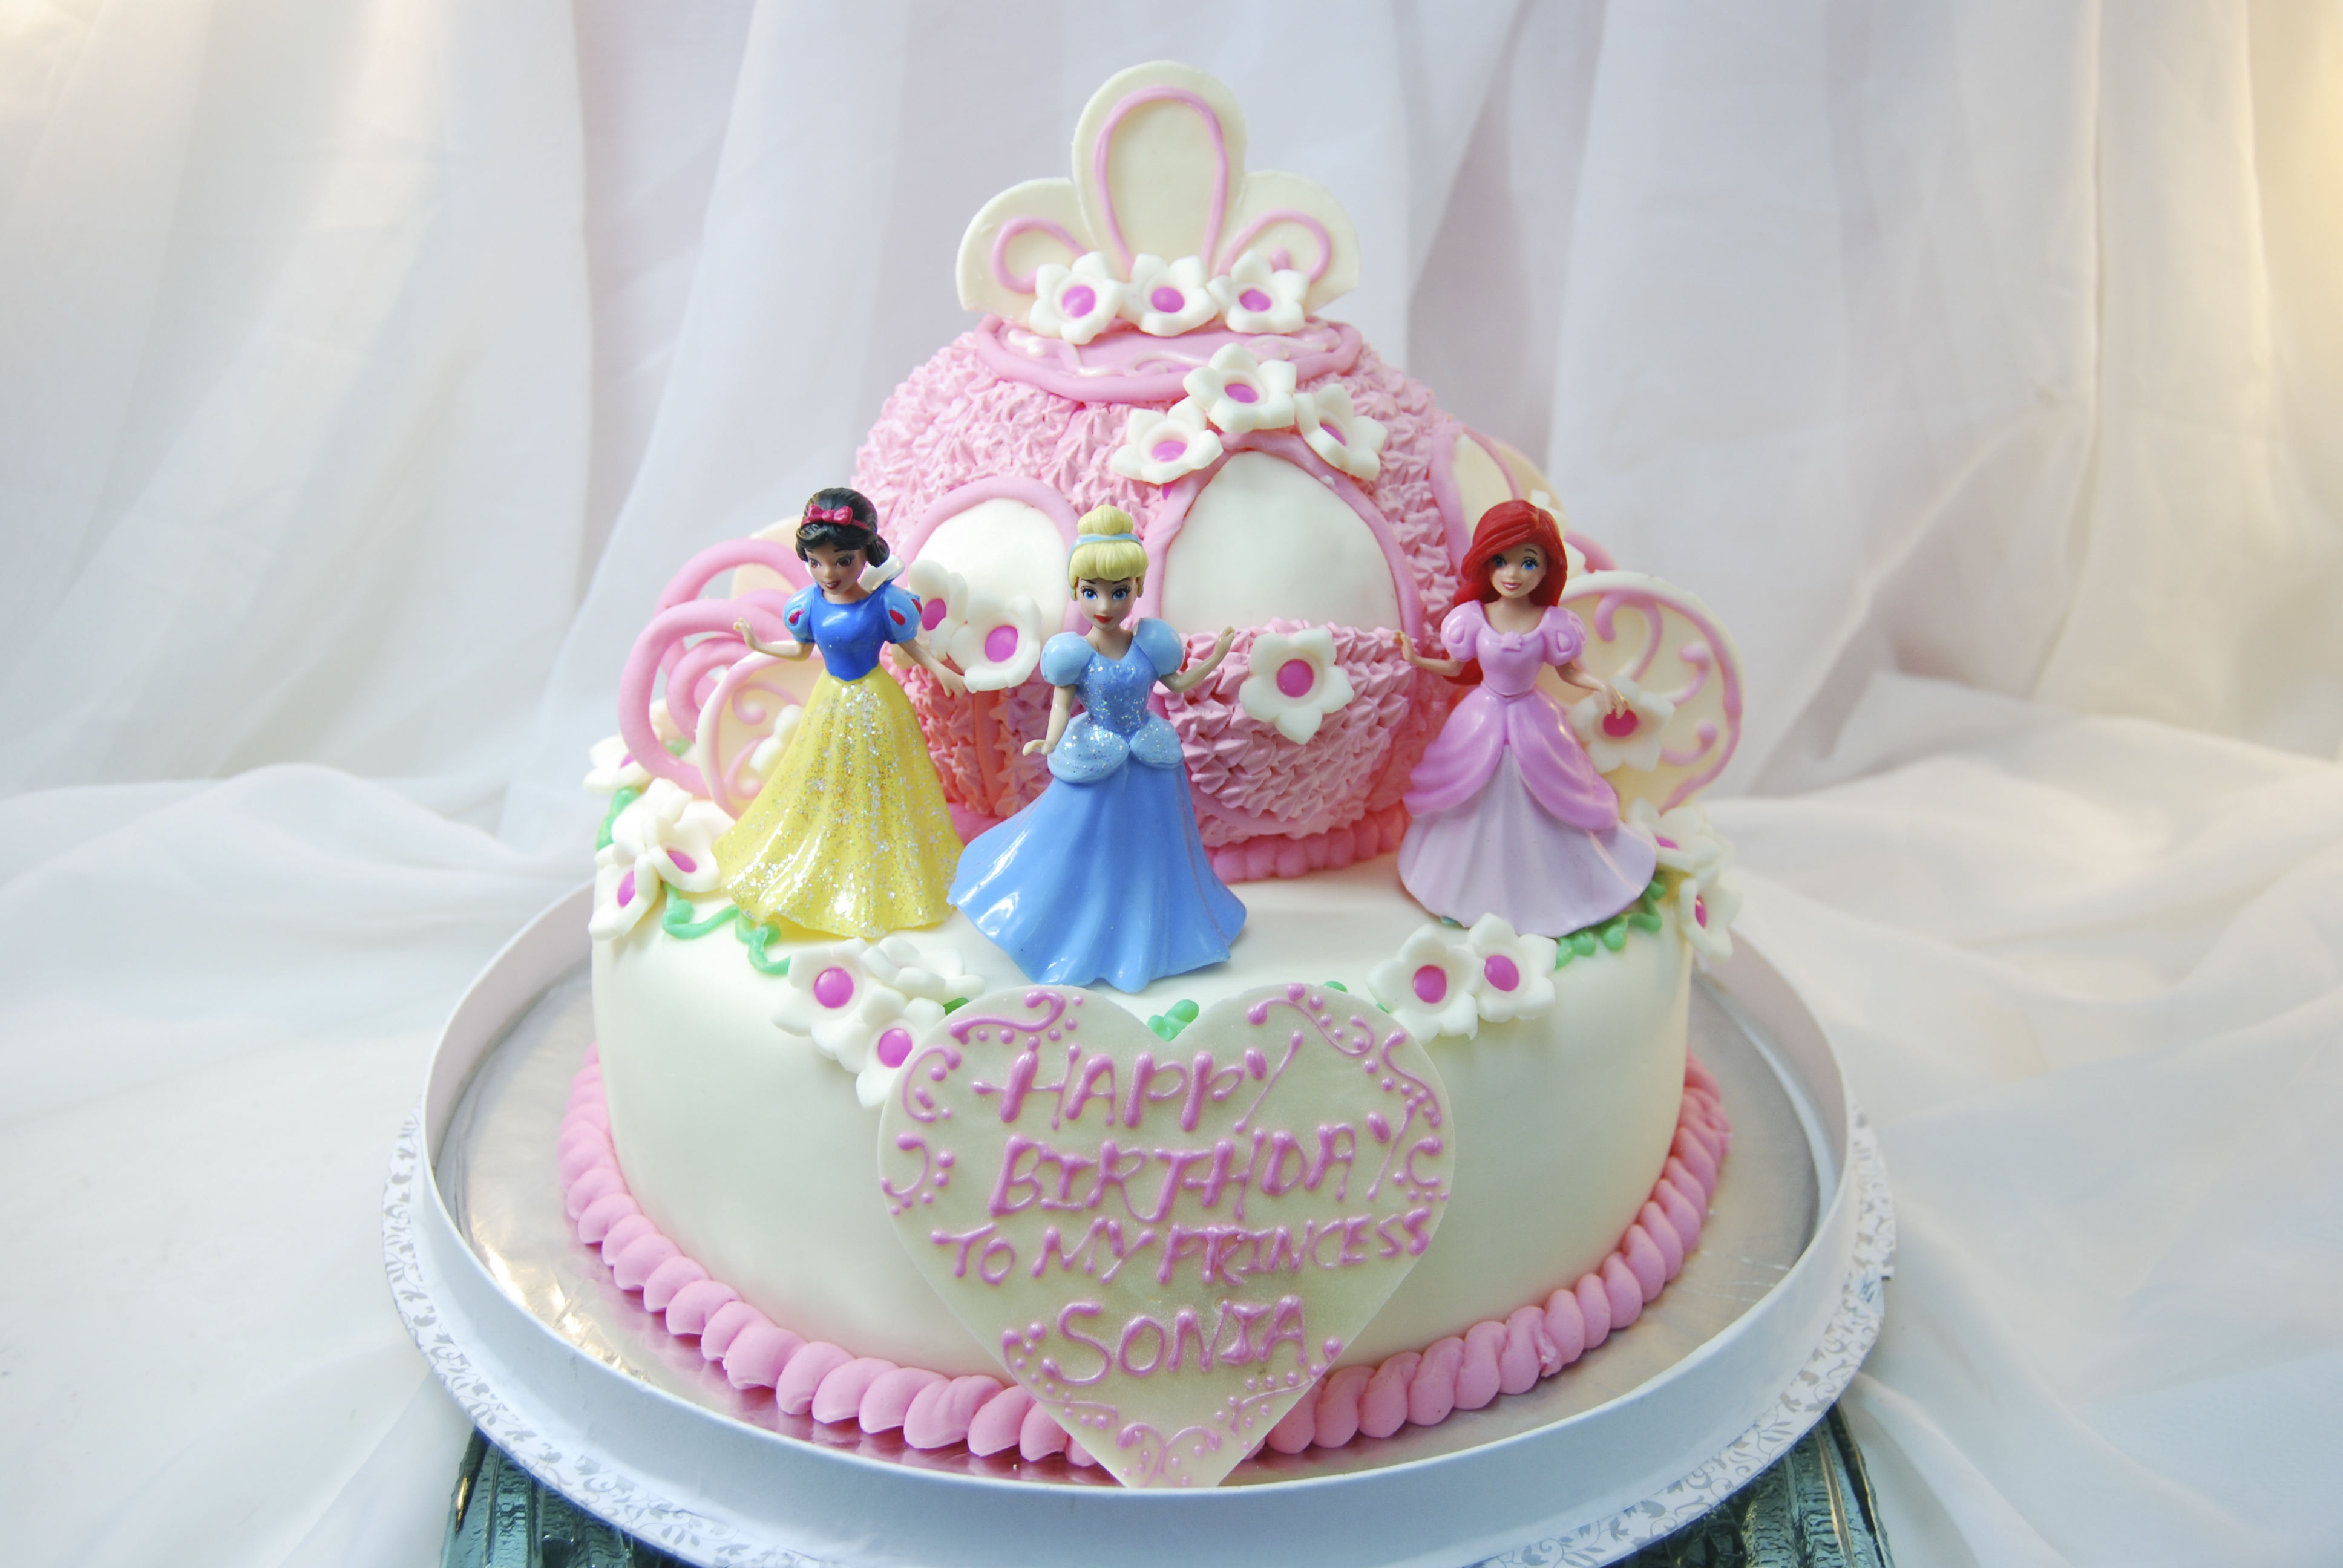 This Handout image shows parties cake from Cake Temptations. HANDOUT [08DECEMBER2015 FEATURES FAMILY PARTIES]